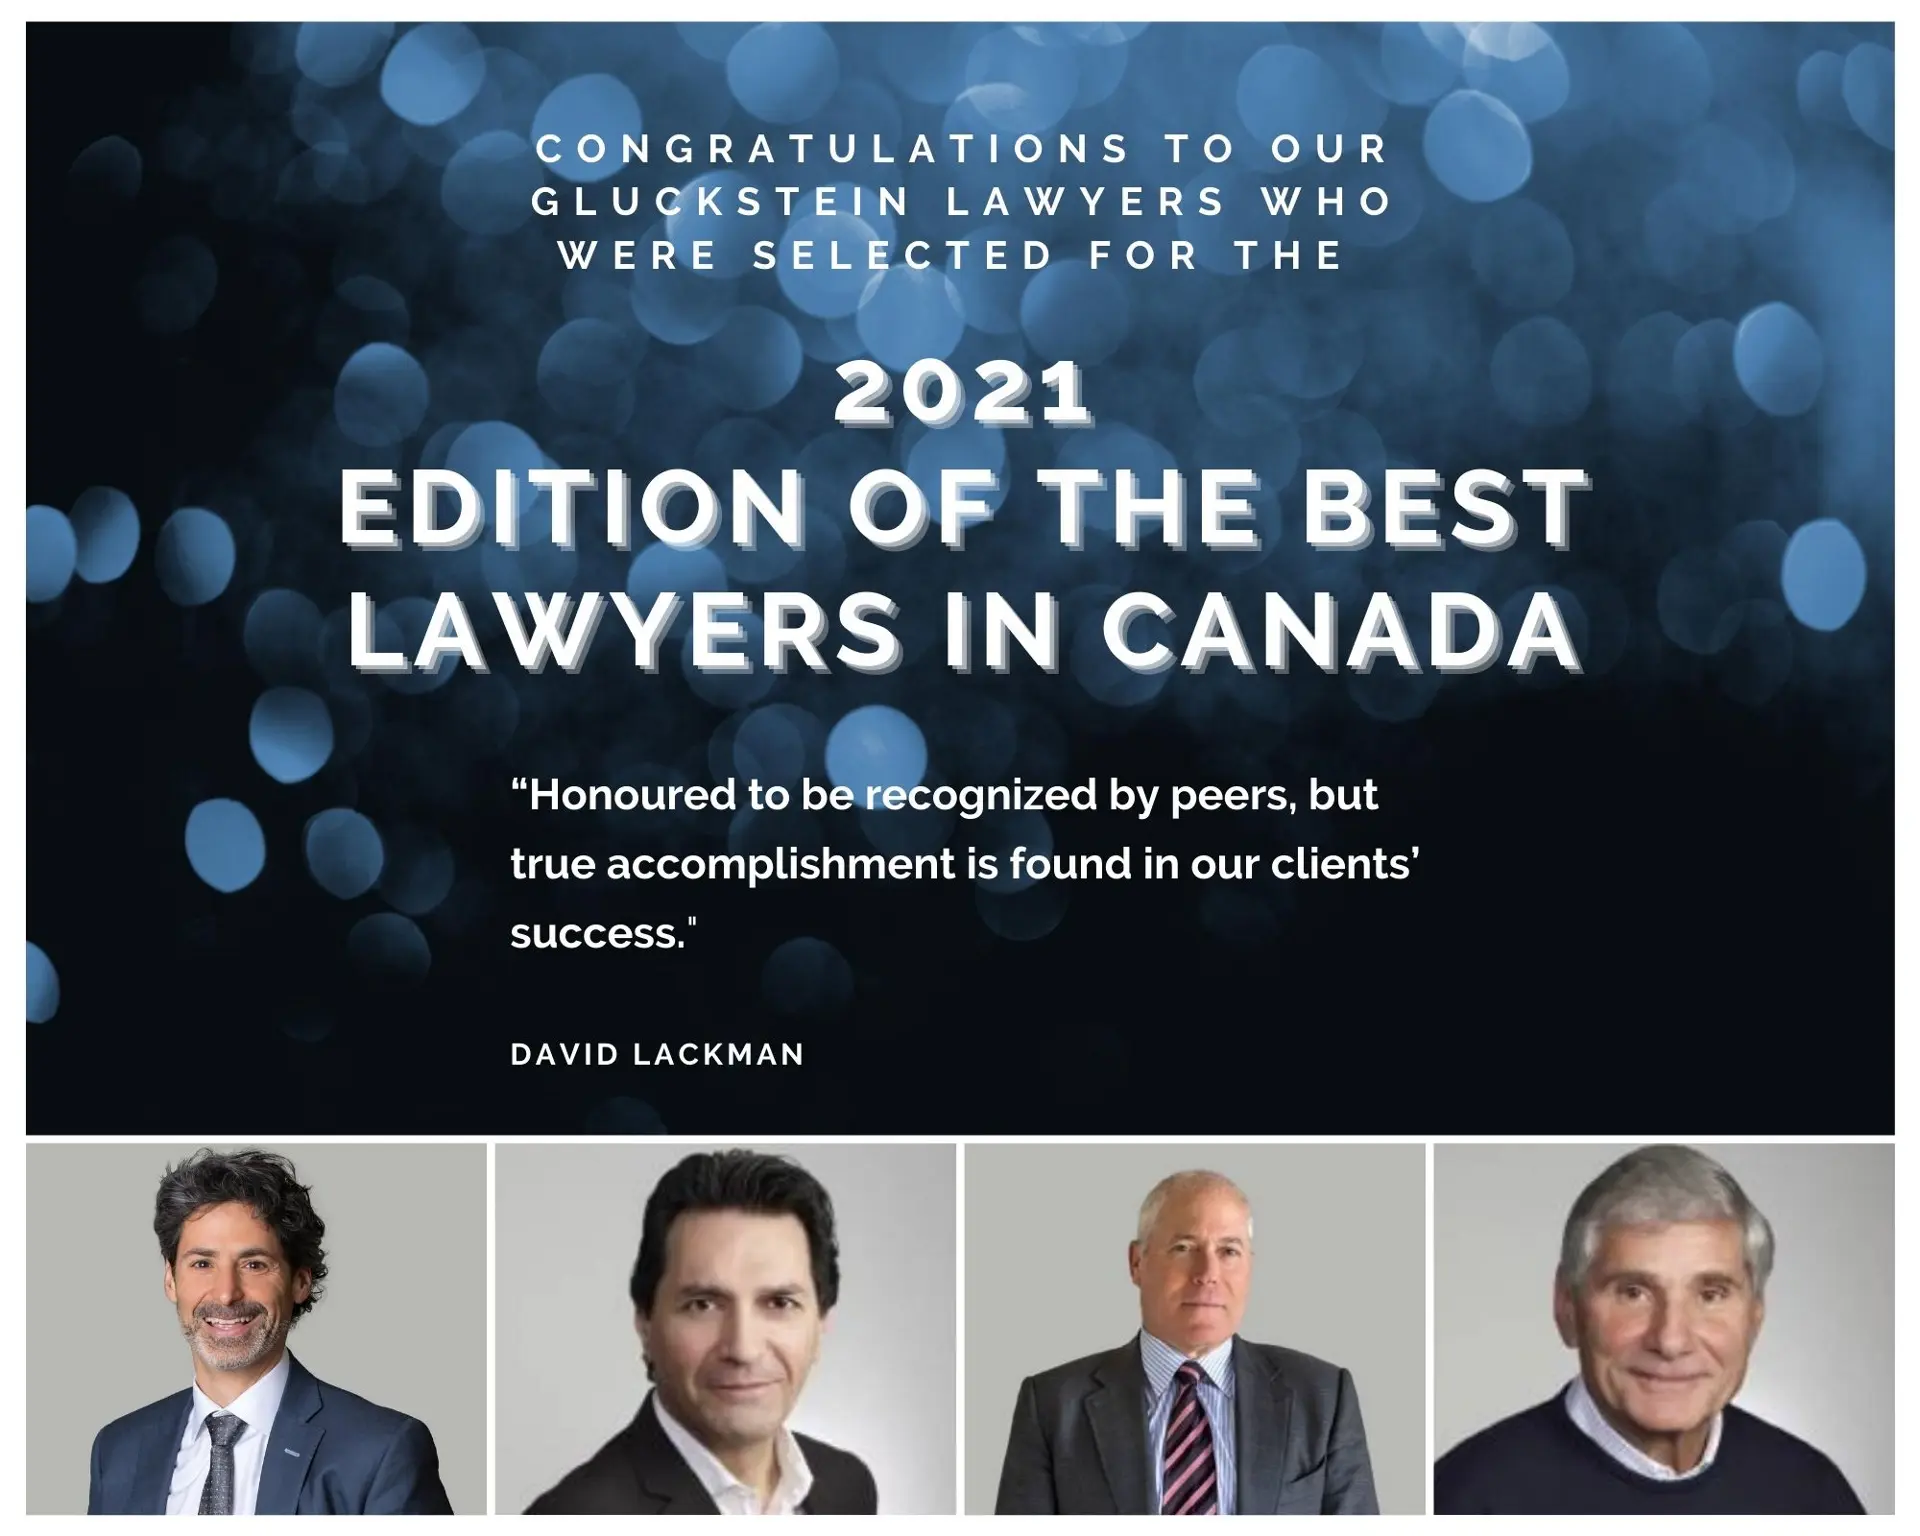 Defocused Particles Background (Blue) stock photo, and headshots of four lawyers, catption 2021 edition of the best lawyers in canada